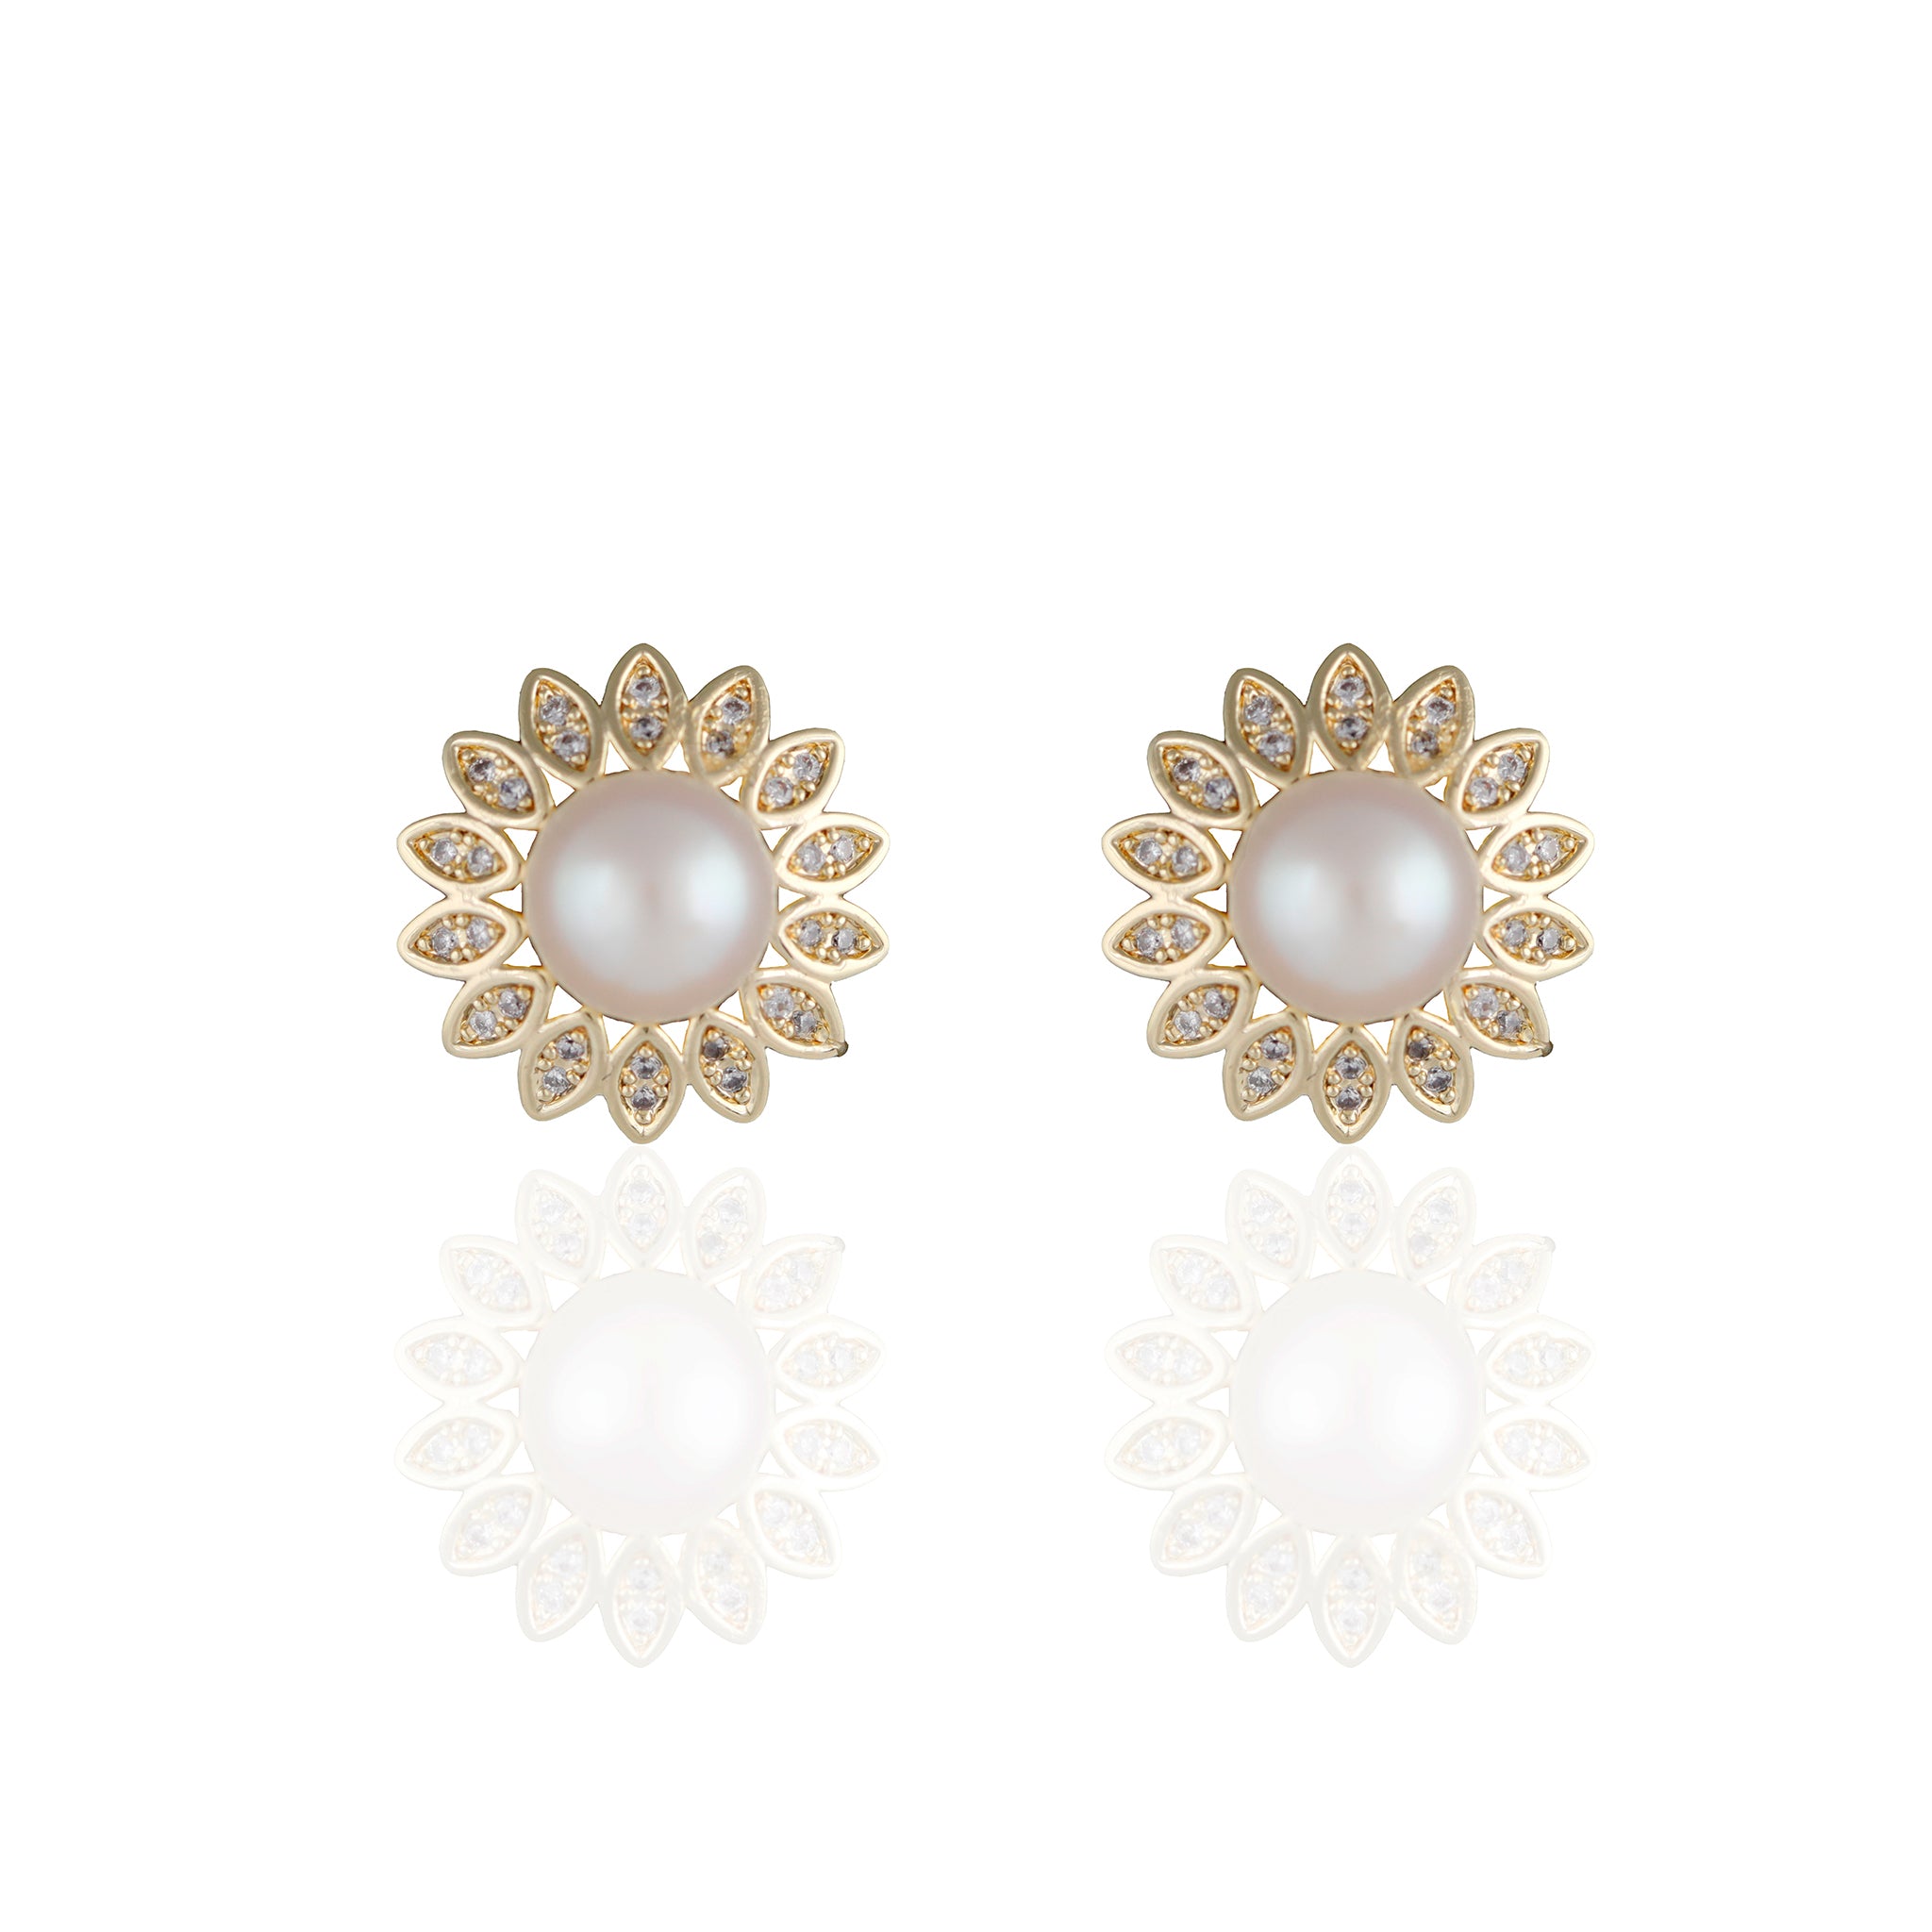 Freshwater Pearl Daisy Stud Earrings in 14K Gold with Gemstones - L'Amour Pearls